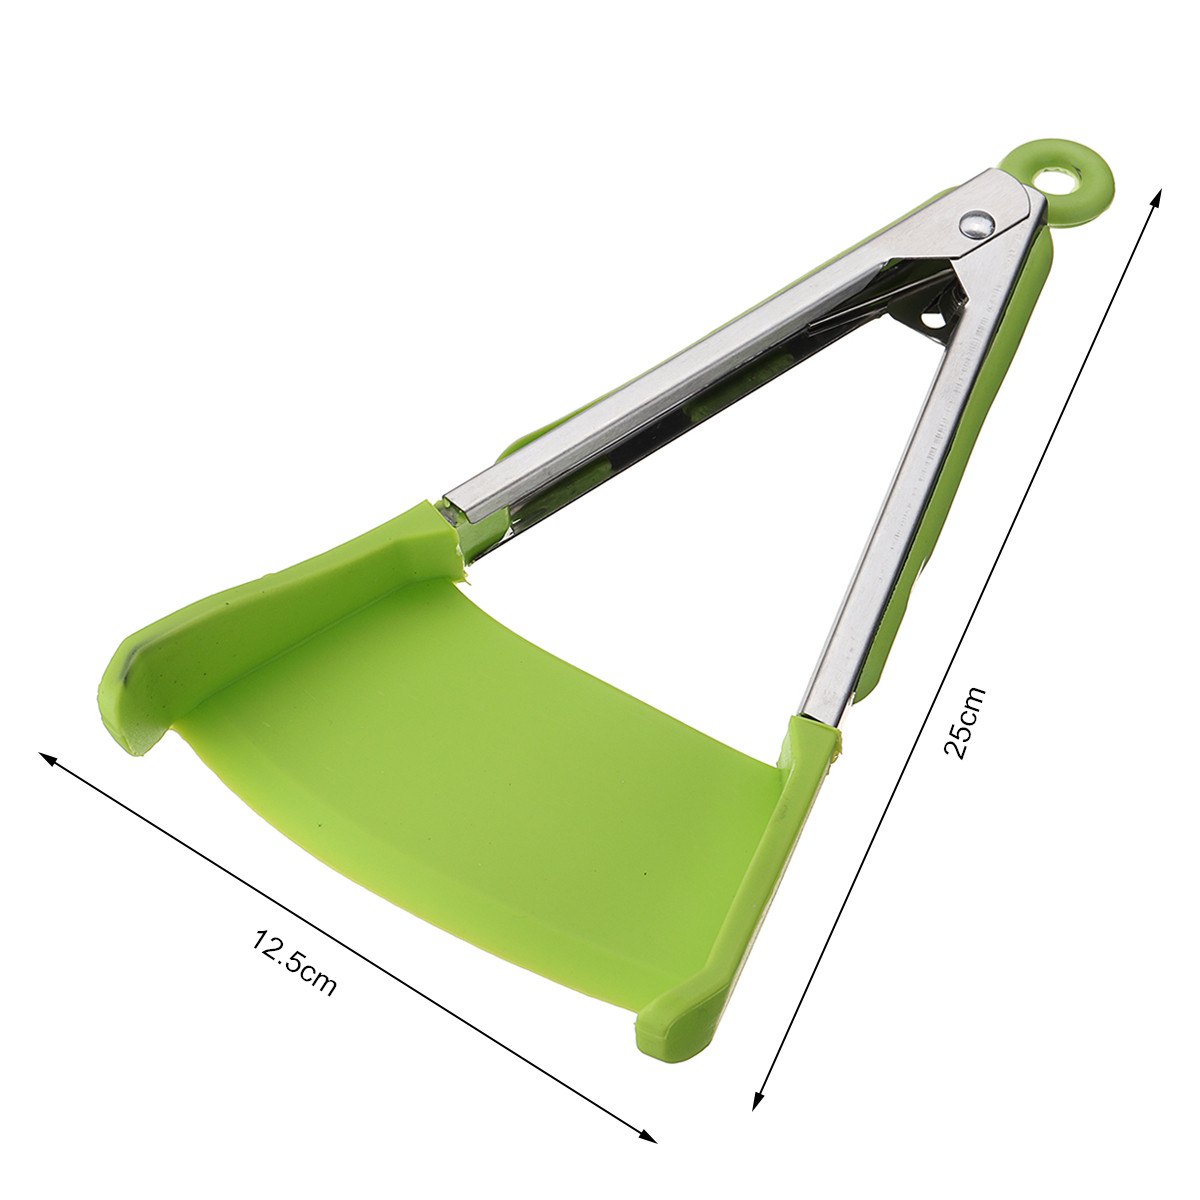 2-in-1--Non-stick-Clever-Tongs-Heat-Resistant-Silicone-Spatula-Cooking-Food-Clip-Camping-Picnic-BBQ-1329346-3